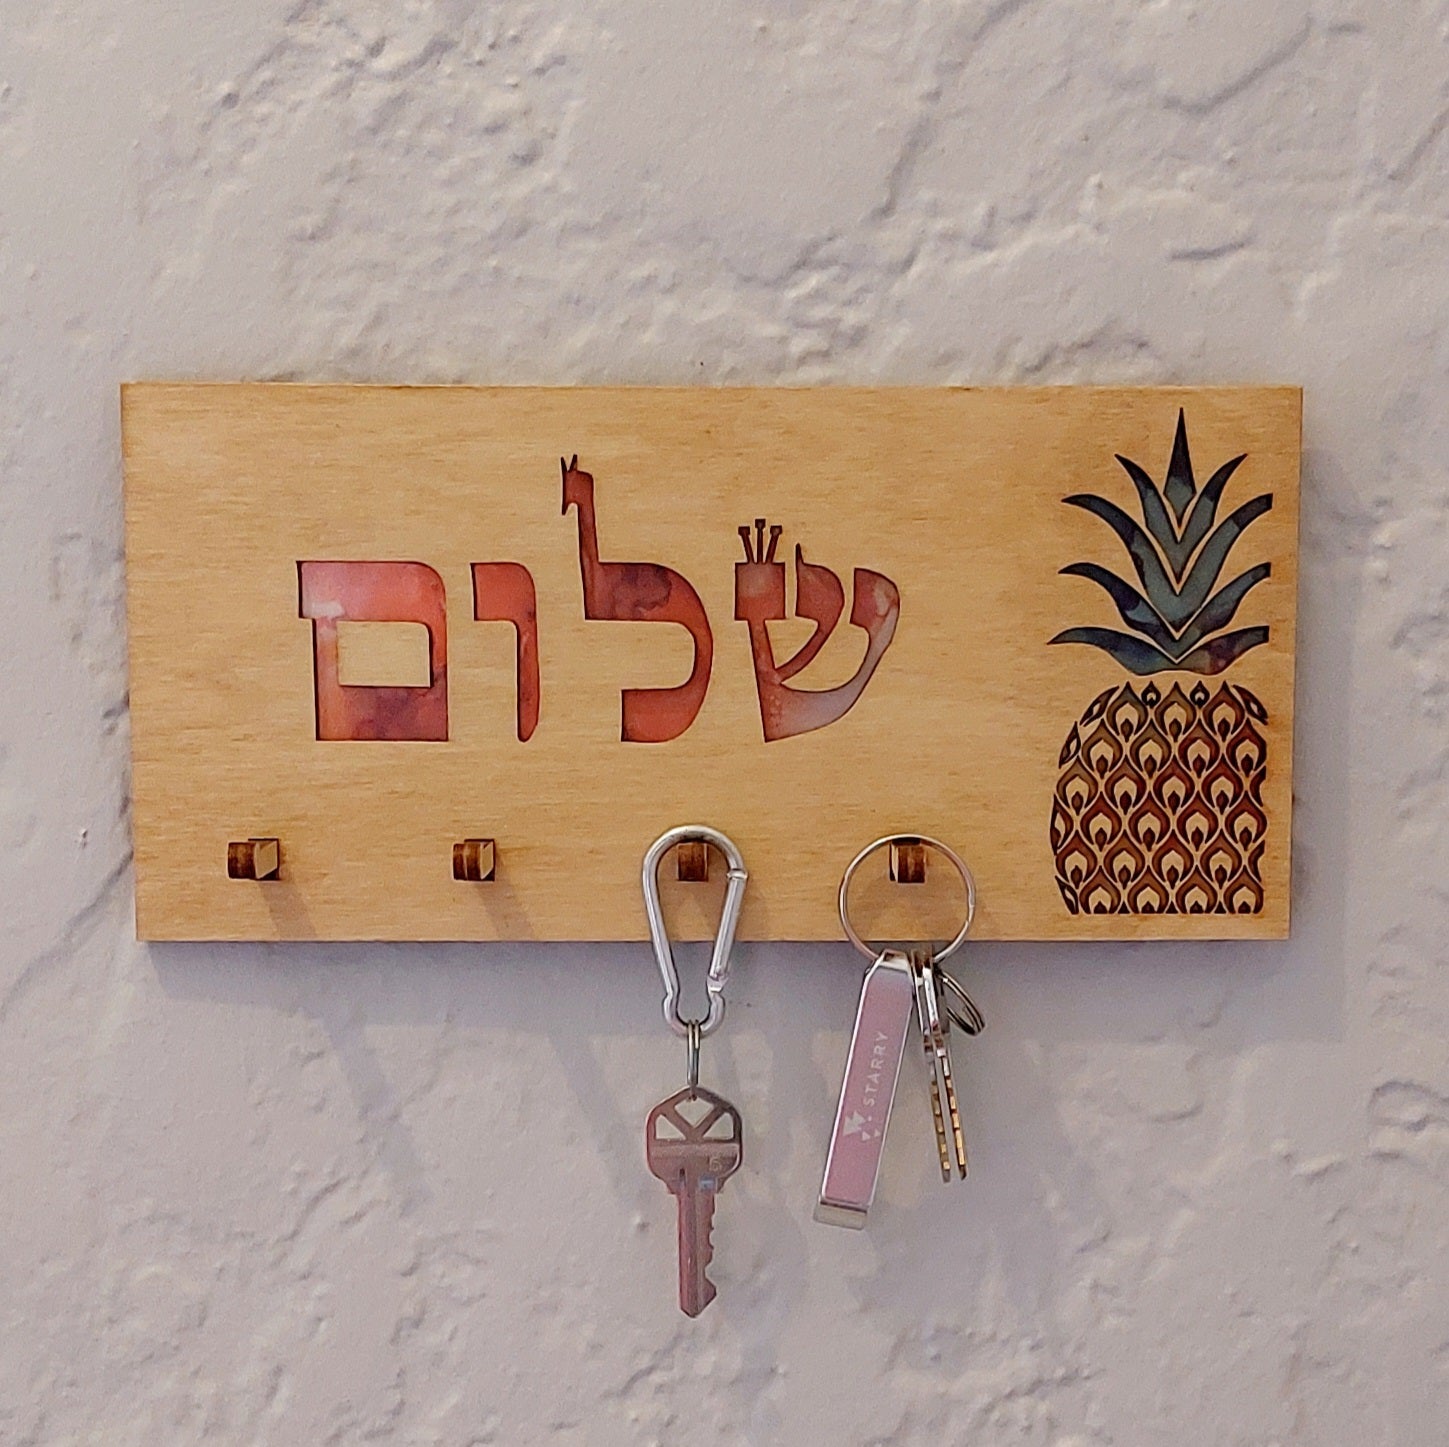 Lightly stained wood rectangular key holder. Cutout "שלום" with red background, pineapple with green, yellow, and orange, and 4 pegs for keys with keys hanging on them.